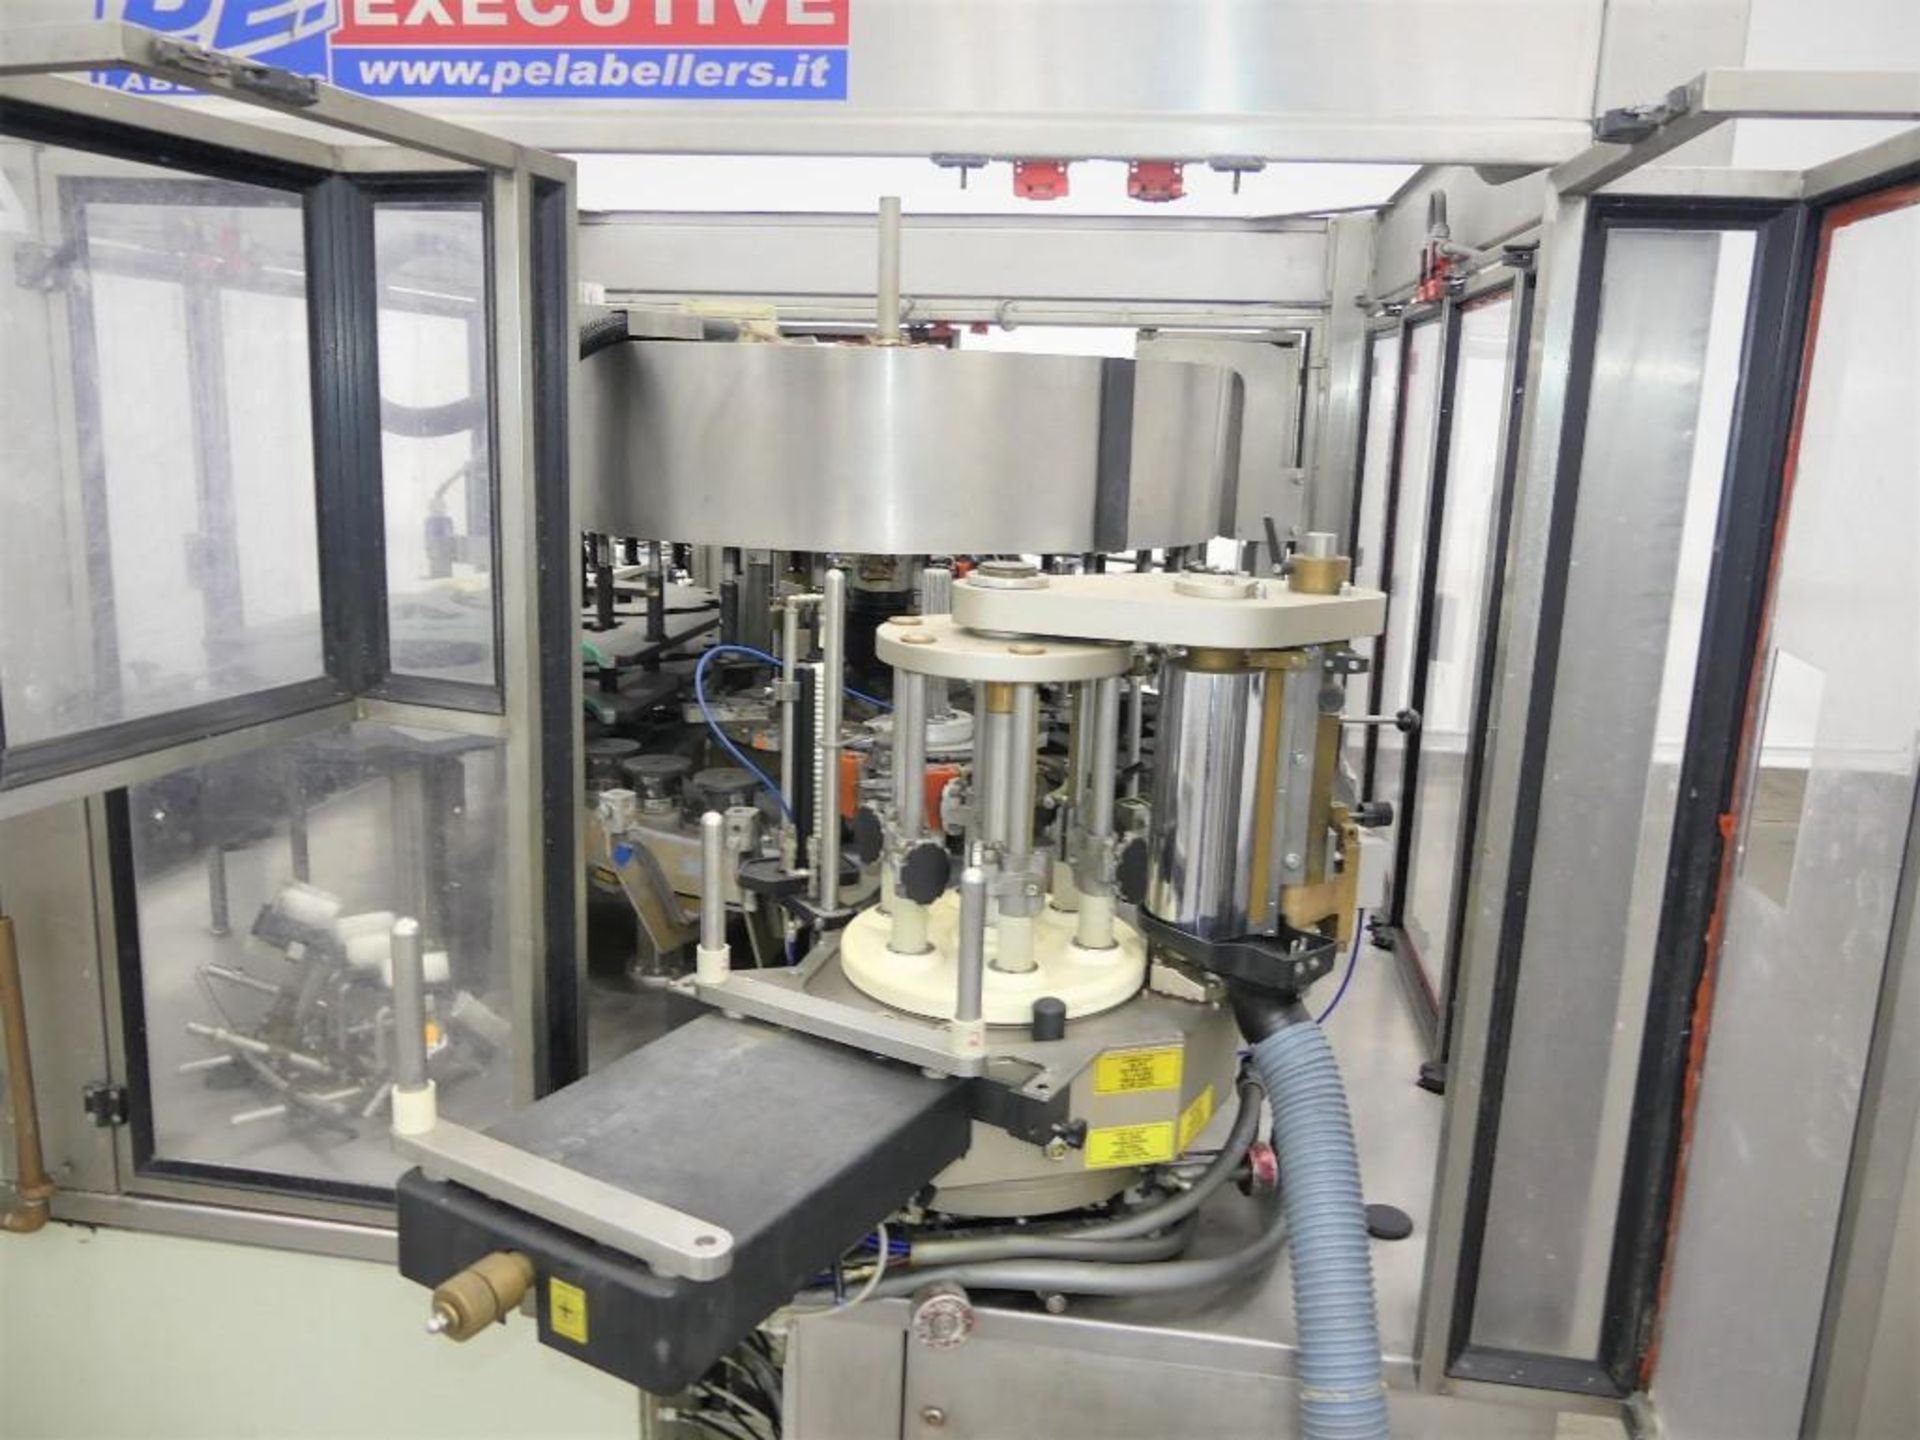 PE Labellers Executive KC 570 Automatic Labelling Machine - Image 11 of 26